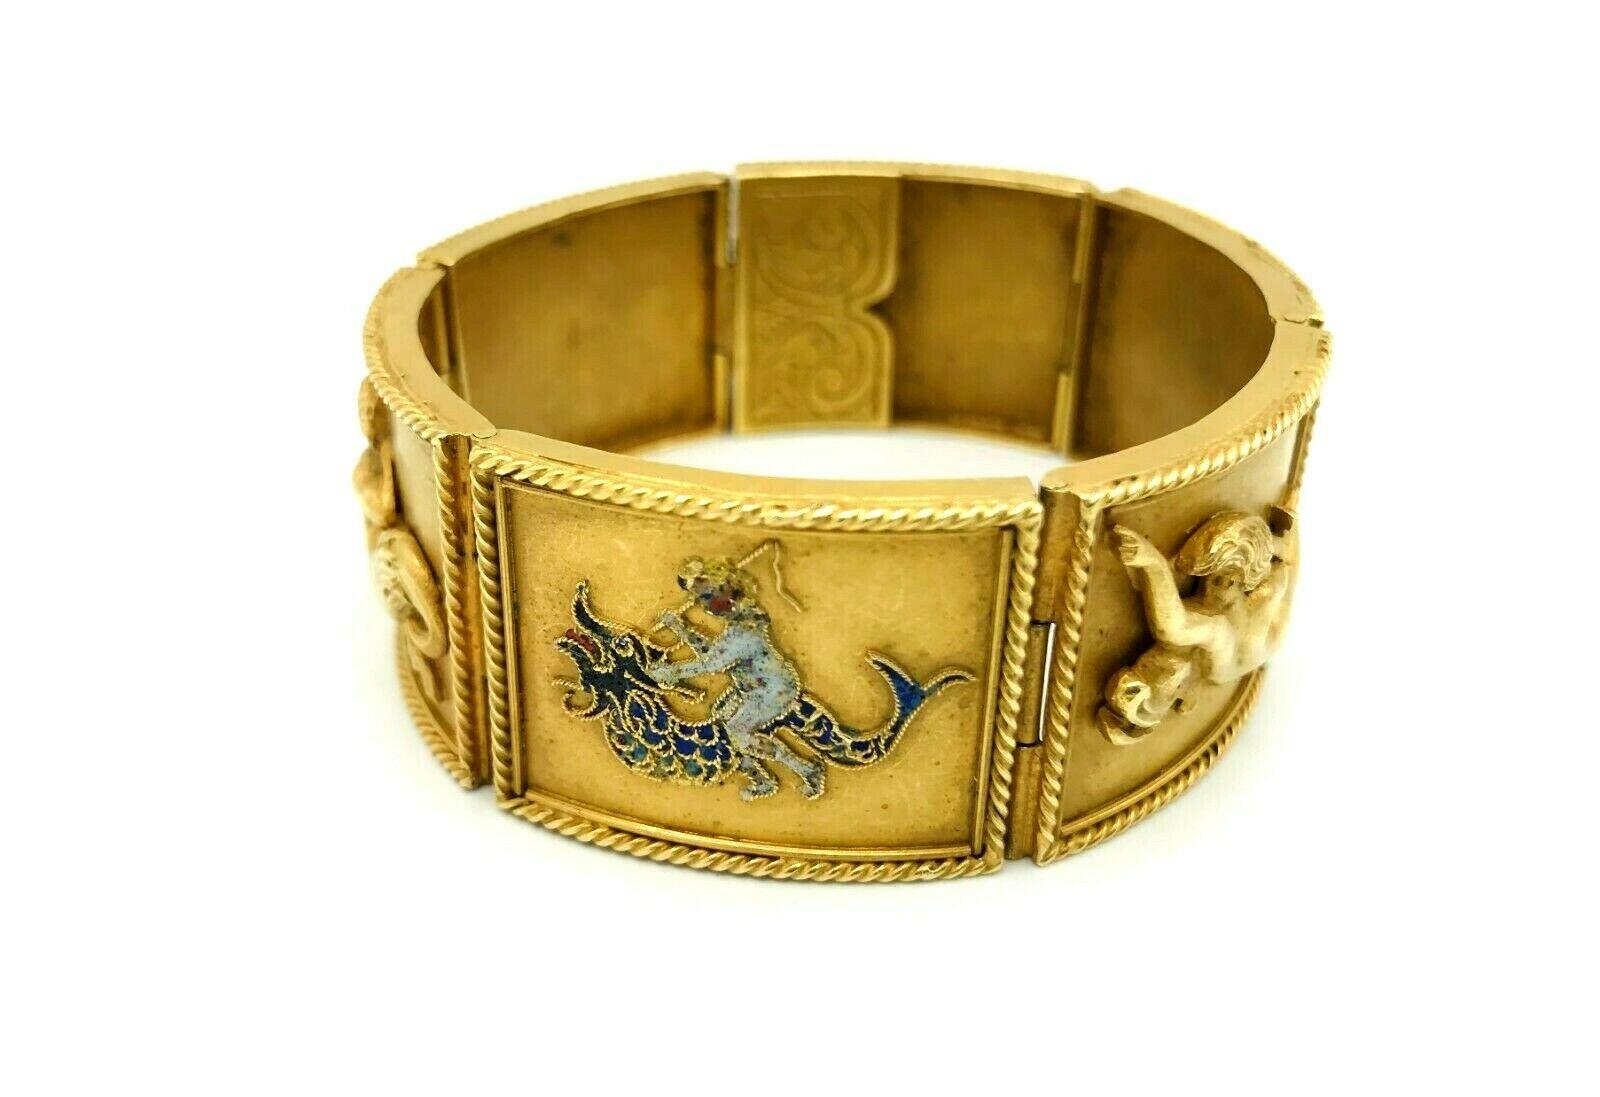 A gorgeous sectional Vintage bracelet made of 18k yellow gold. 
Features three embossed and three enamel figures portraying mythological creatures. 
Each section stamped with a hallmark for 18k gold (on a back). 
Measurements: 7.5